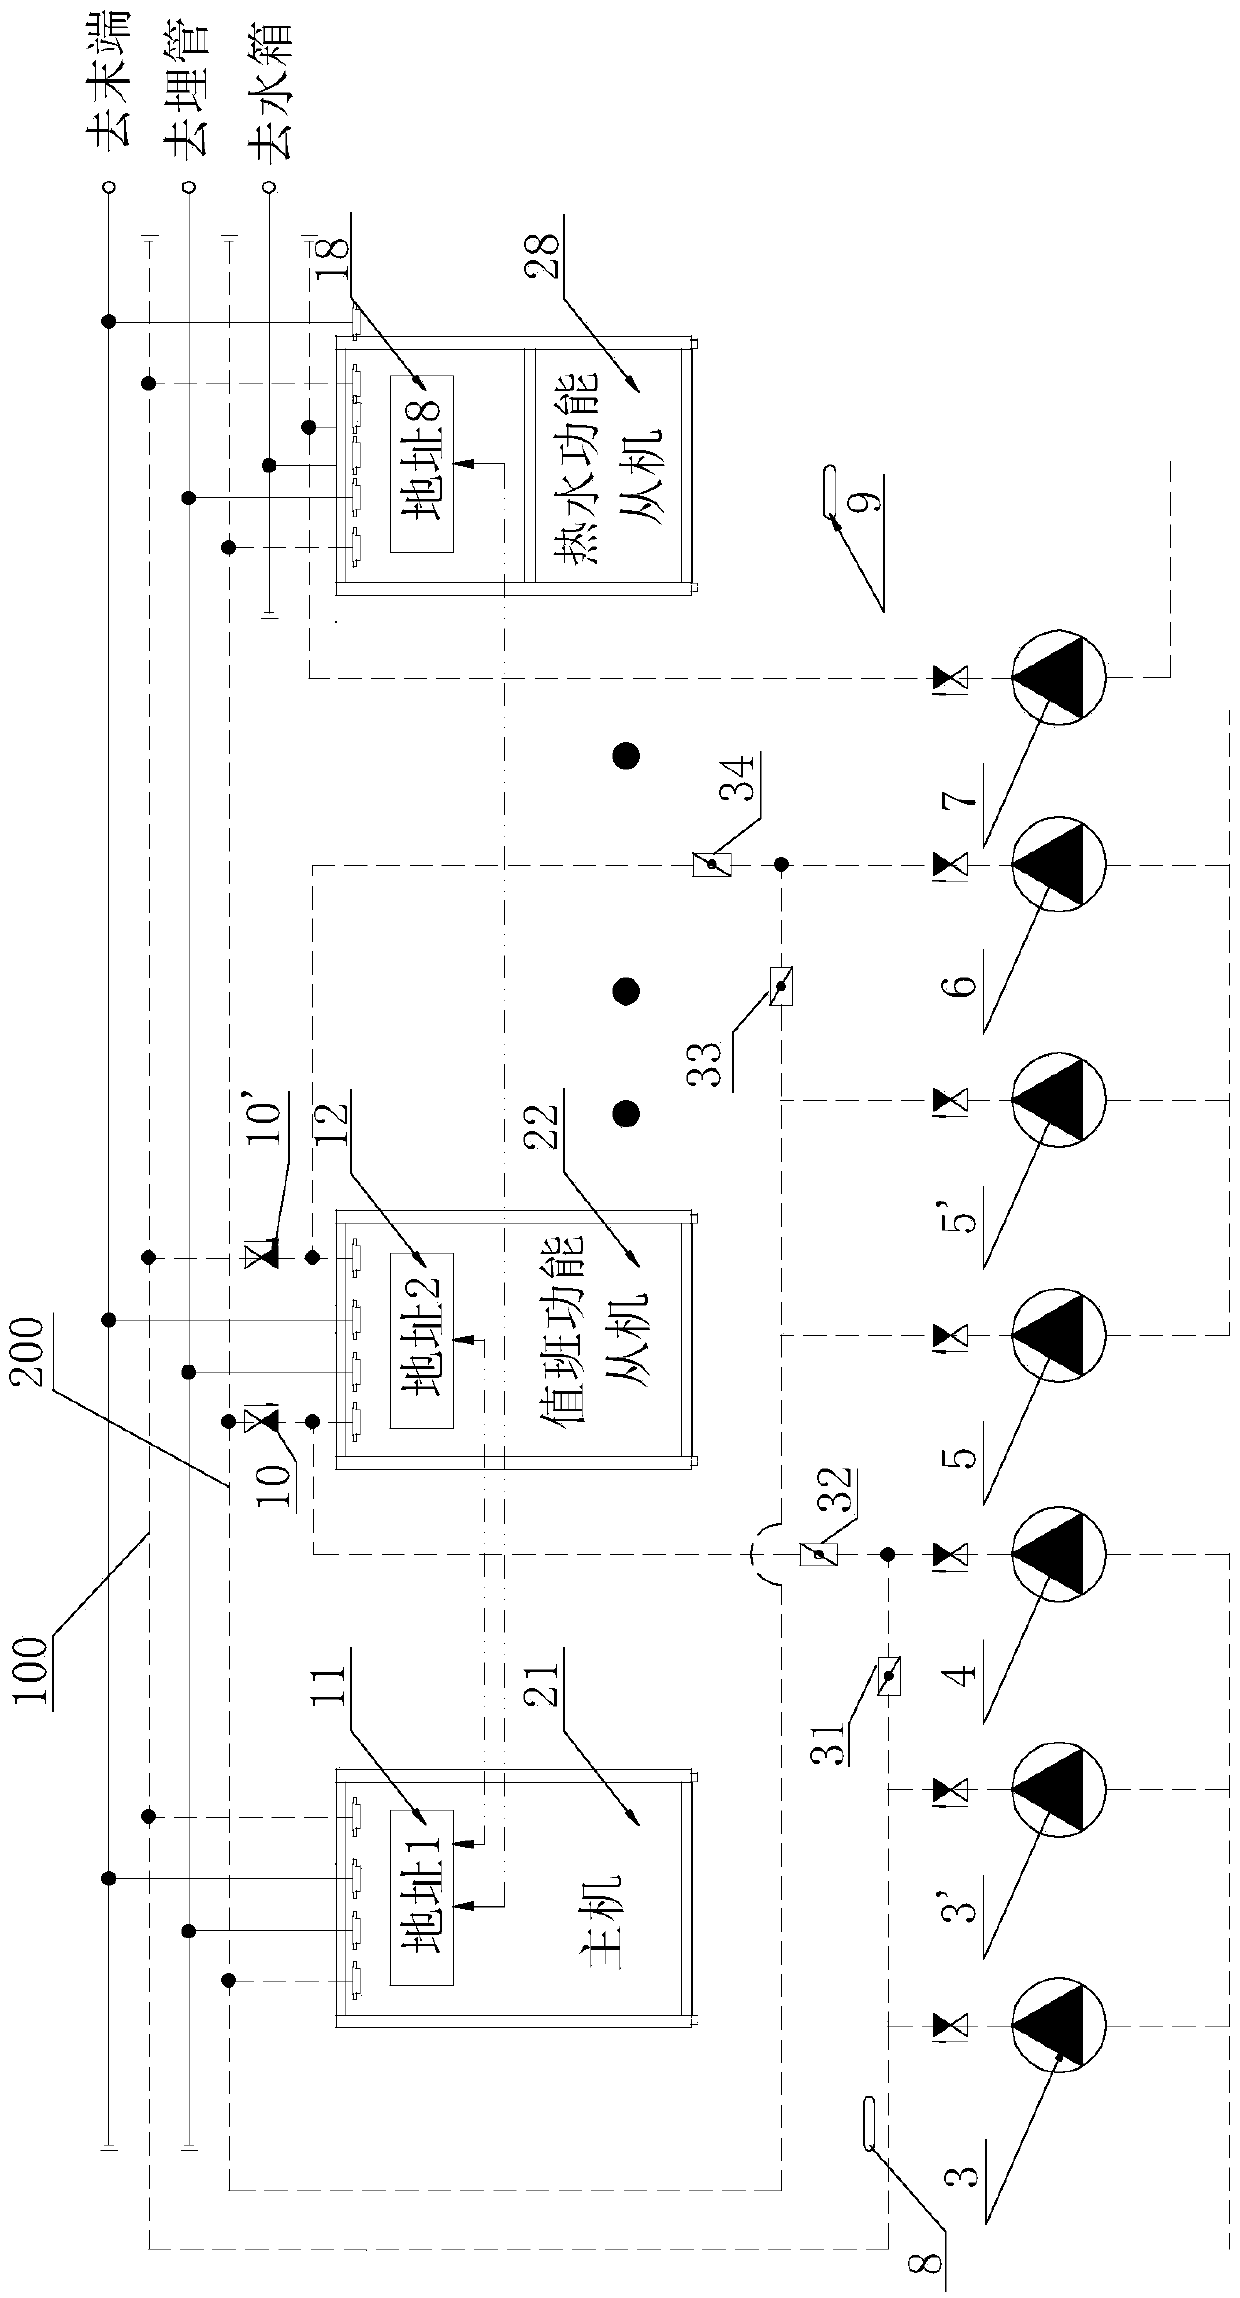 A group control system of ground source heat pump